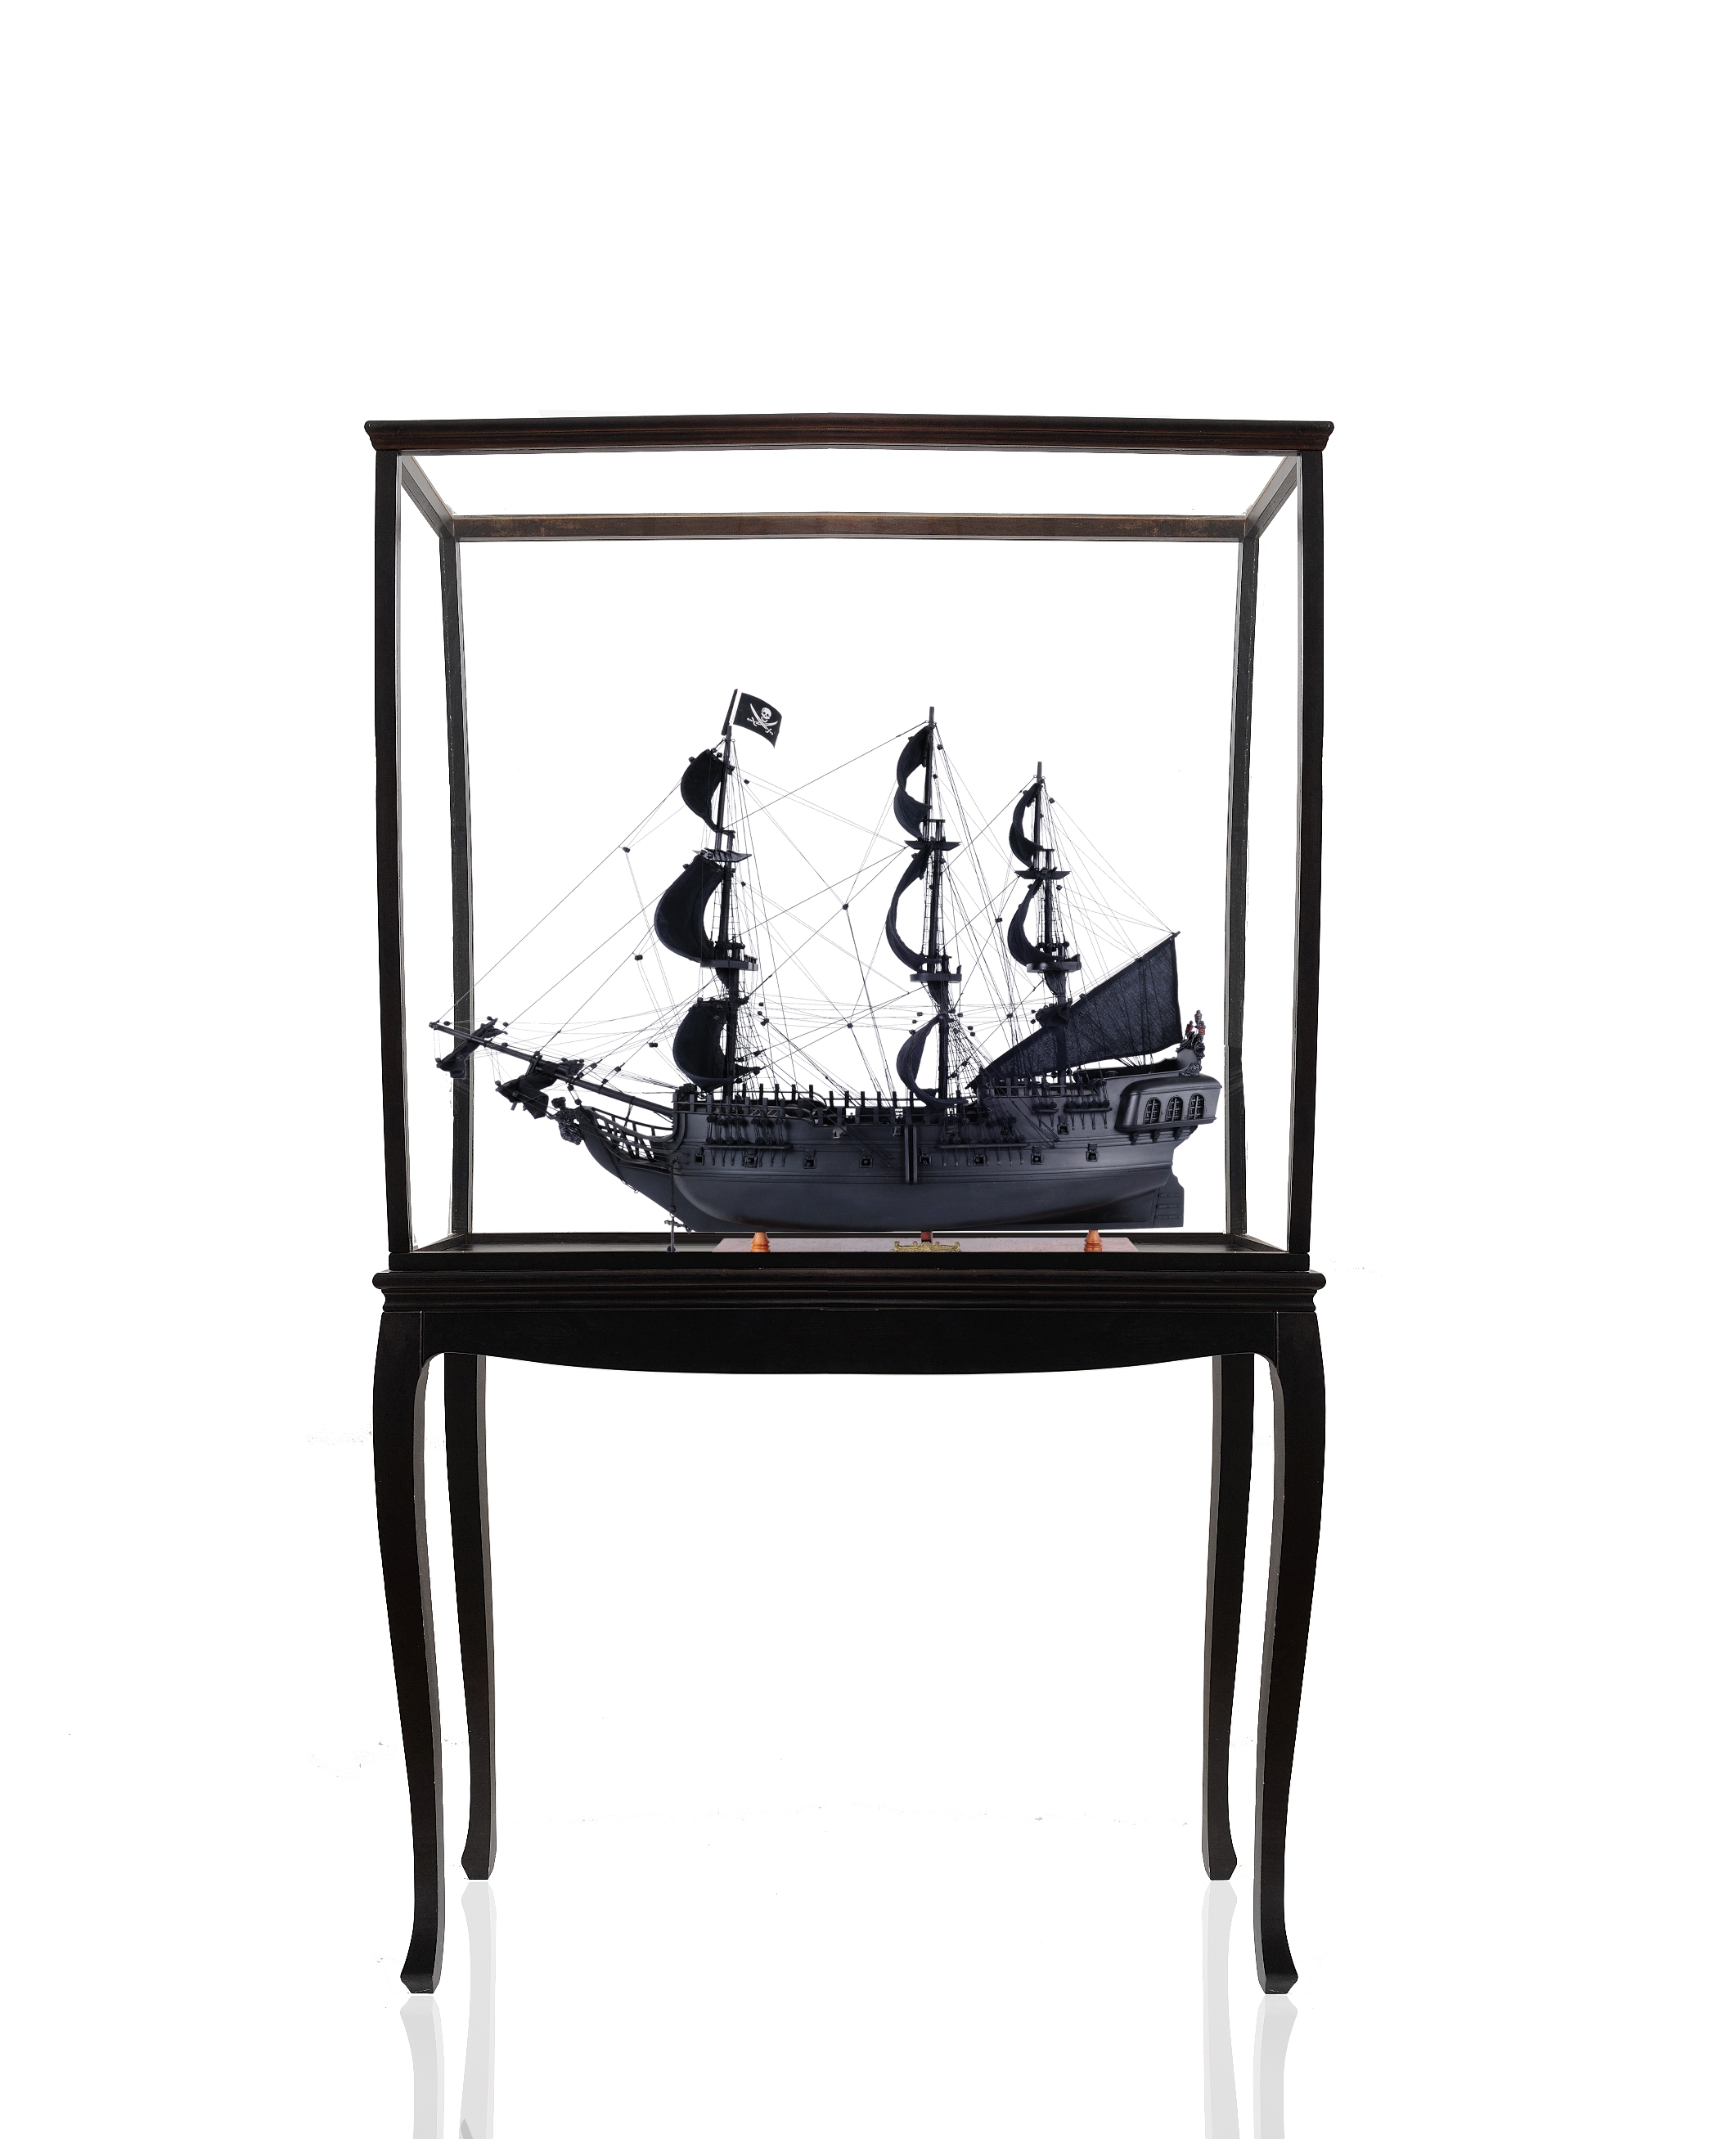 T295B Black Pearl Pirate Ship Large With Floor Display Case t295b-black-pearl-pirate-ship-large-with-floor-display-case-l01.jpg